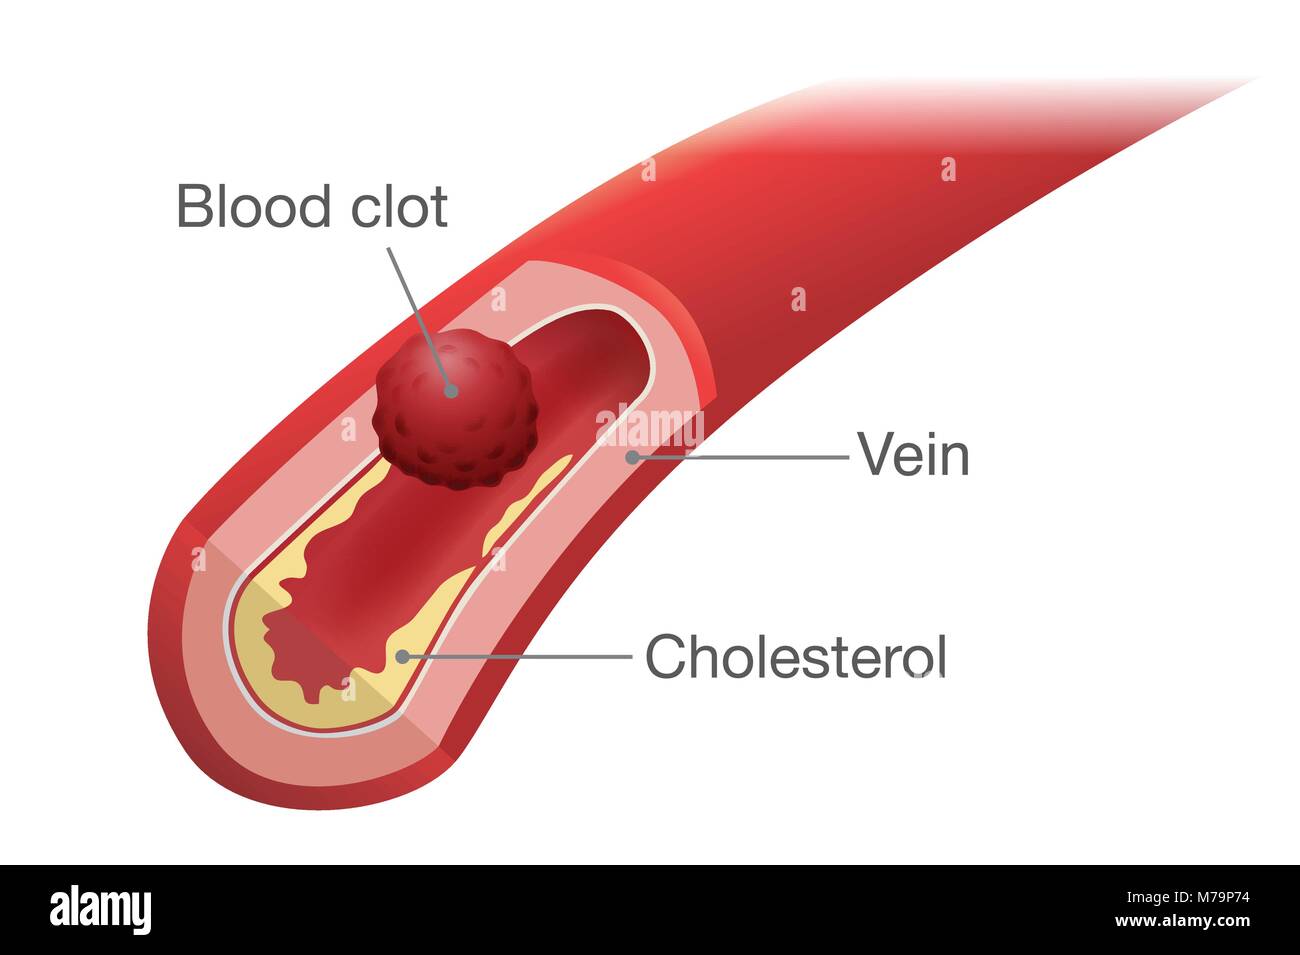 Blood clot occurs in a vein. Stock Vector